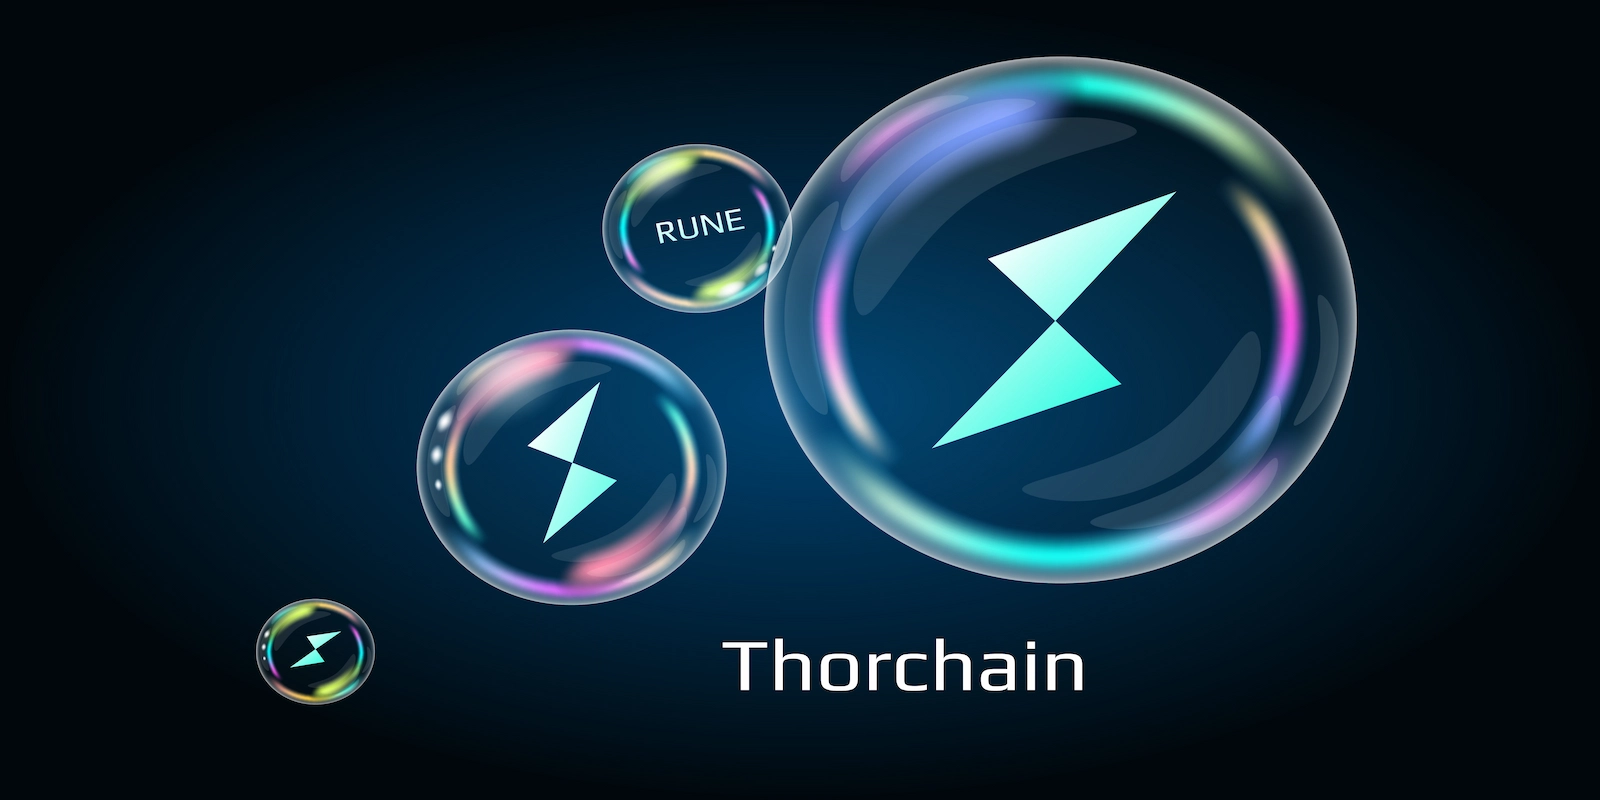 Metamask adding support for THORChain, helping RUNE continue its bull run.